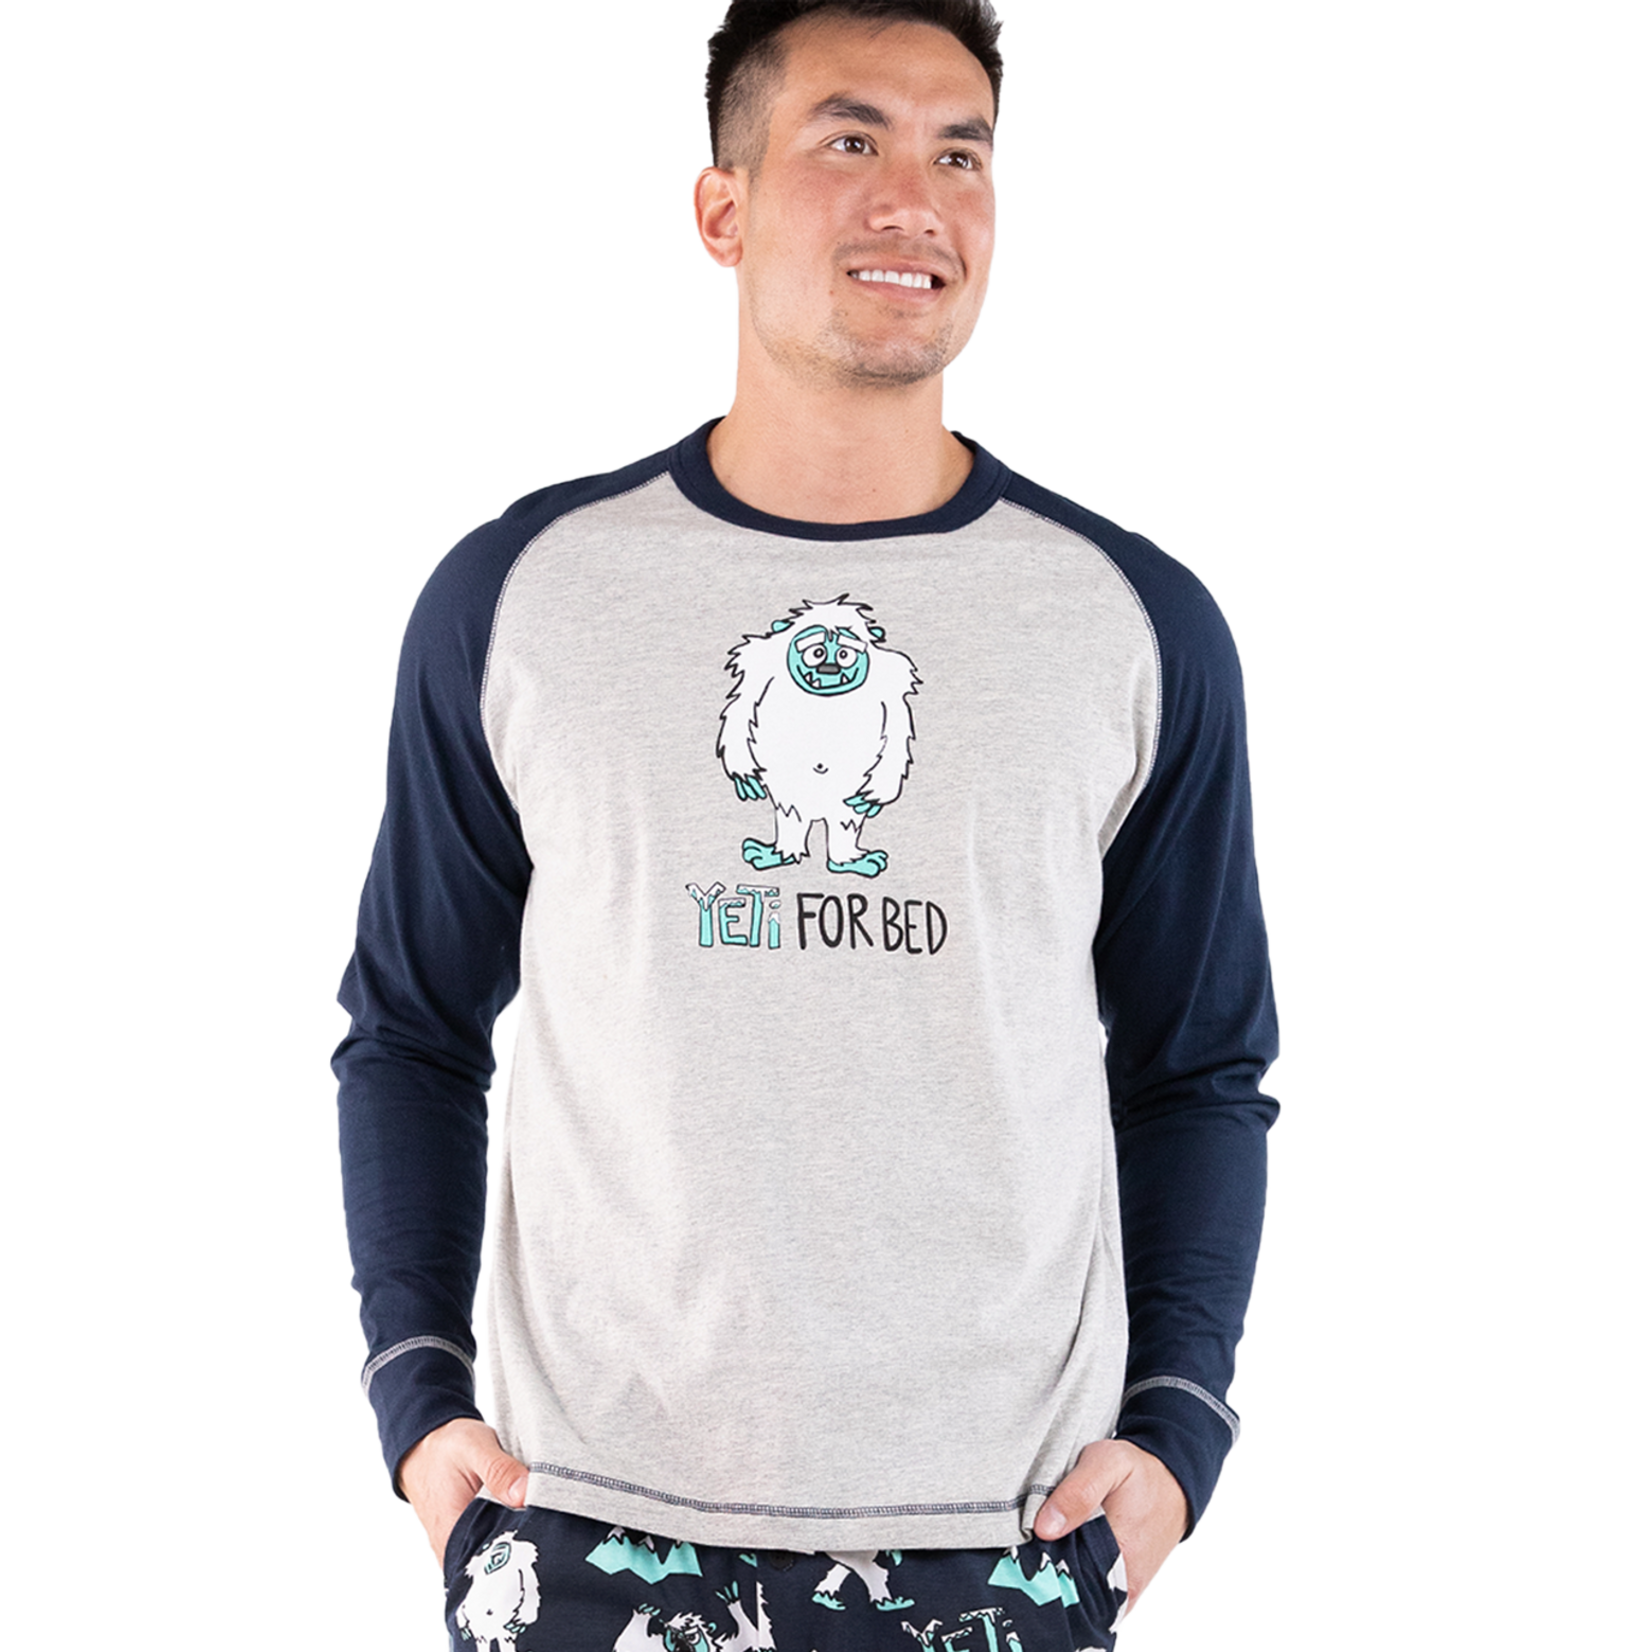 Lazy One (DNR) Yeti For Bed Men's Long Sleeve PJ Tee